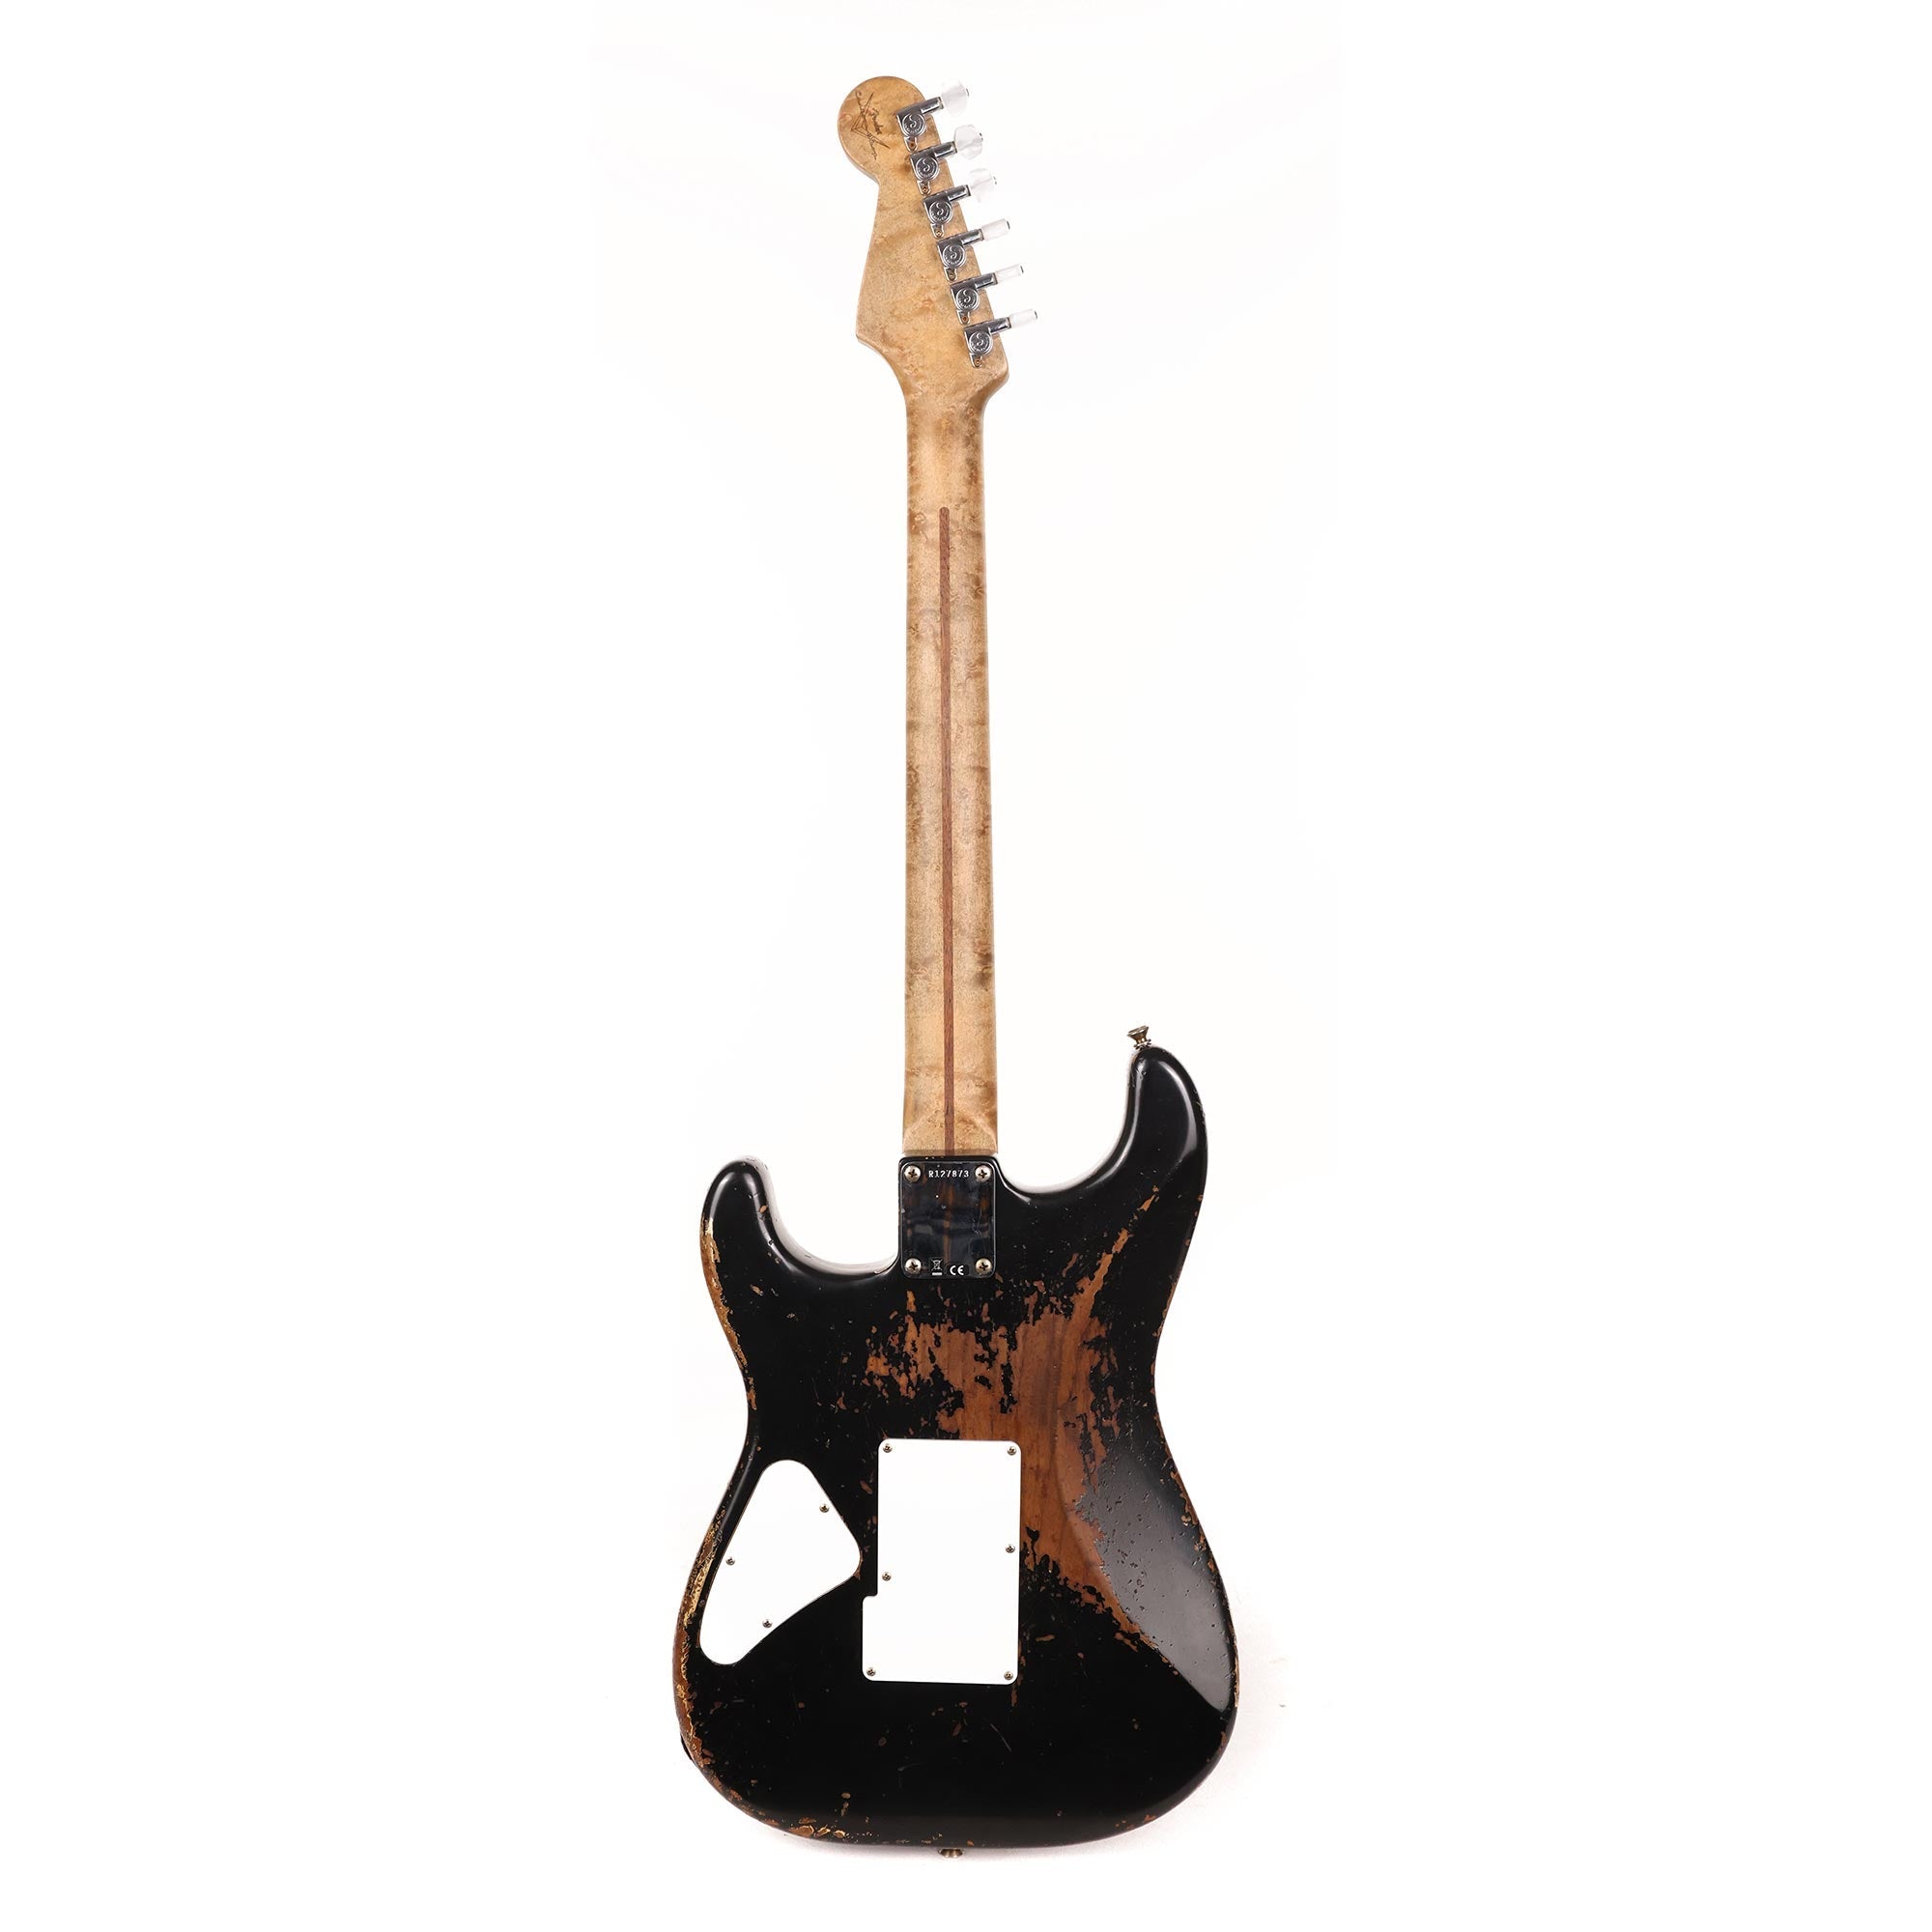 Fender Custom Shop ZF Stratocaster Heavy Relic Black | The Music Zoo